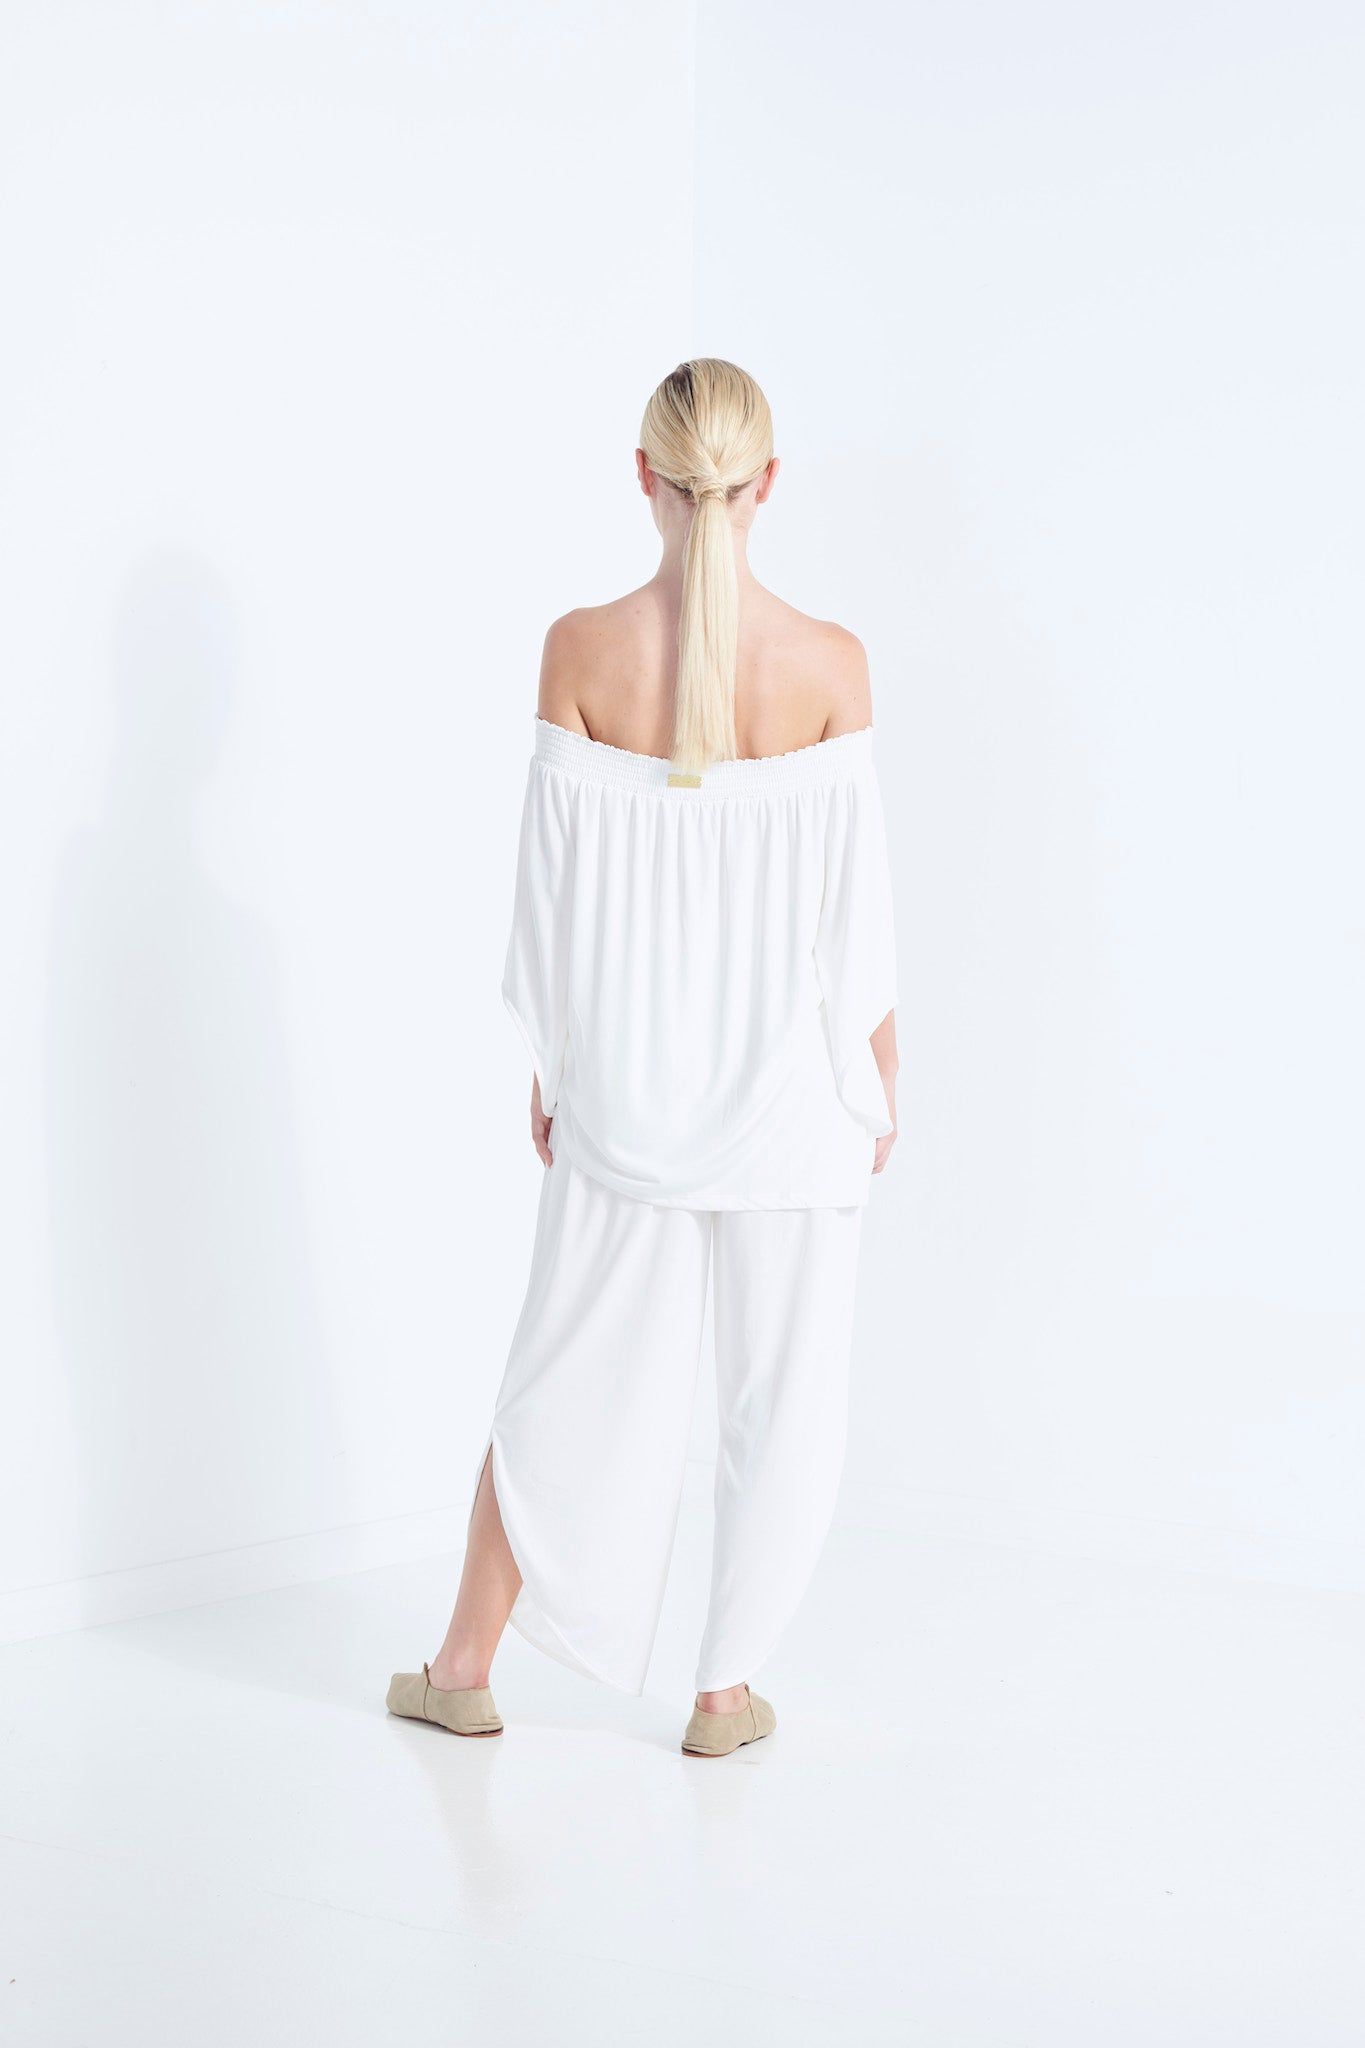 NAEVIA OFF SHOULDER TOP KNIT BEECHWOOD MODAL ELASTIC TOP WITH BELL SLEEVE DEW MILKY WHITE BACK VIEW